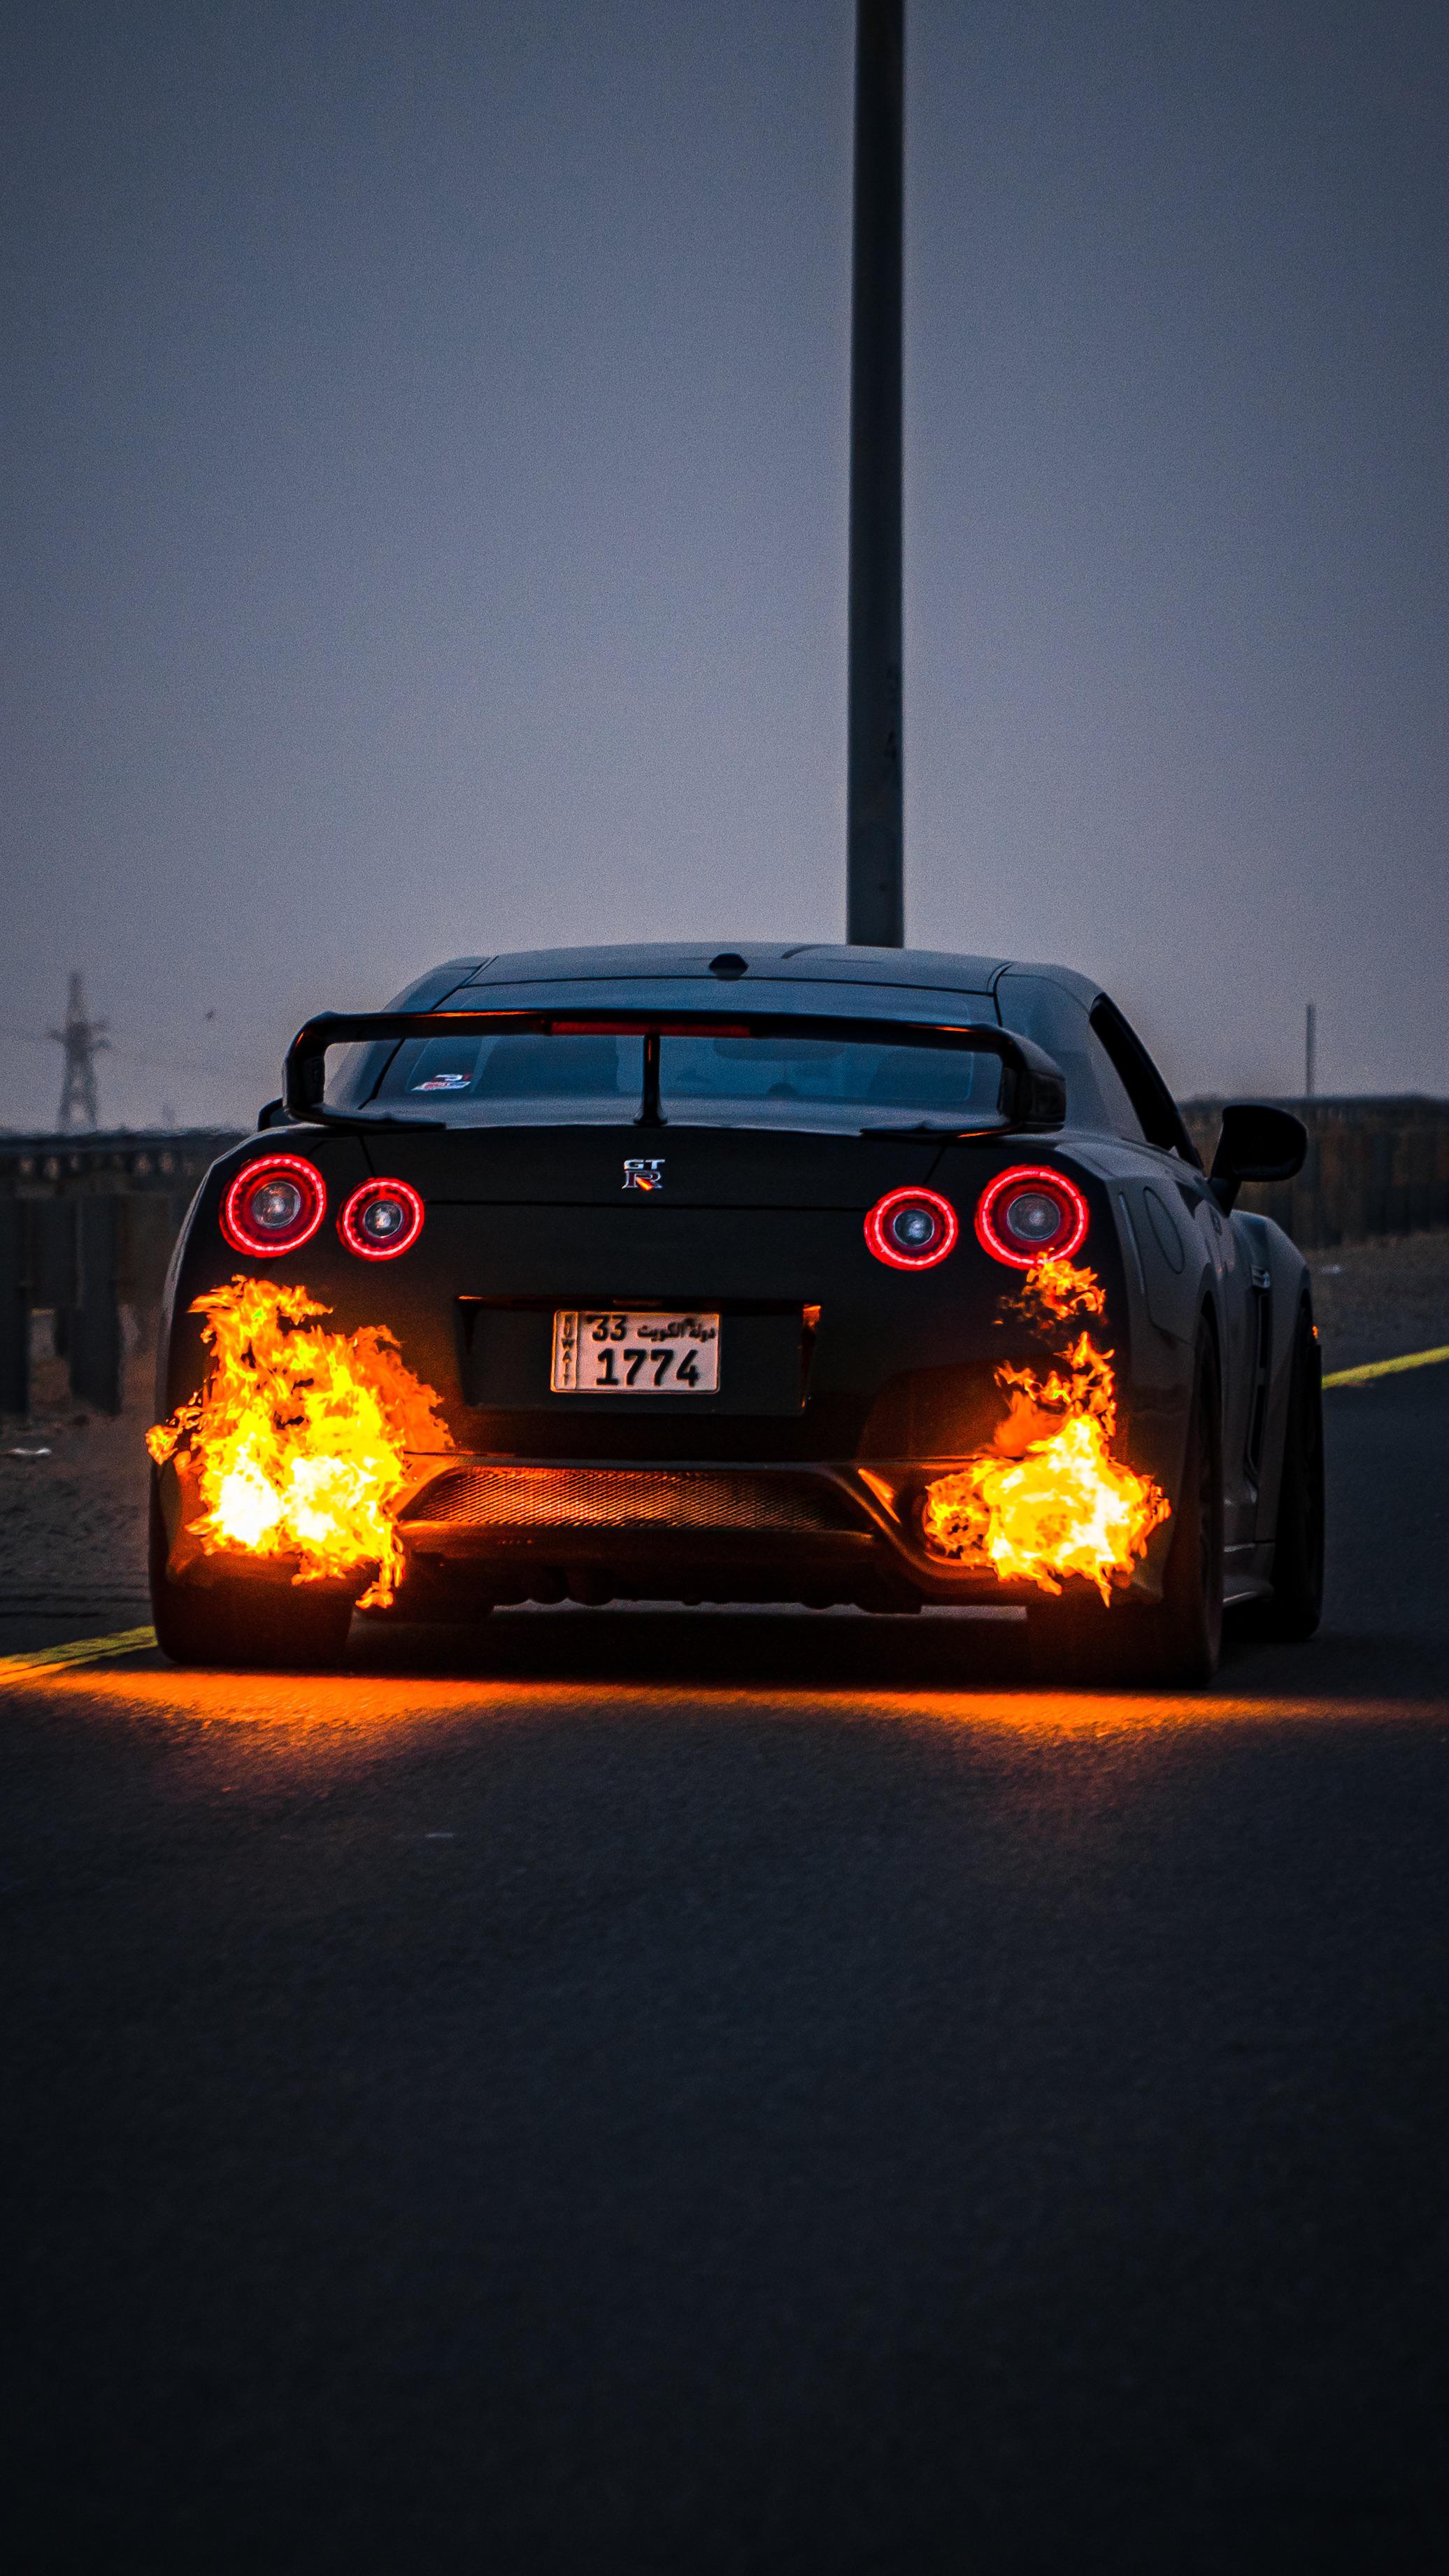 ITAP of a flame throwing gtr r35